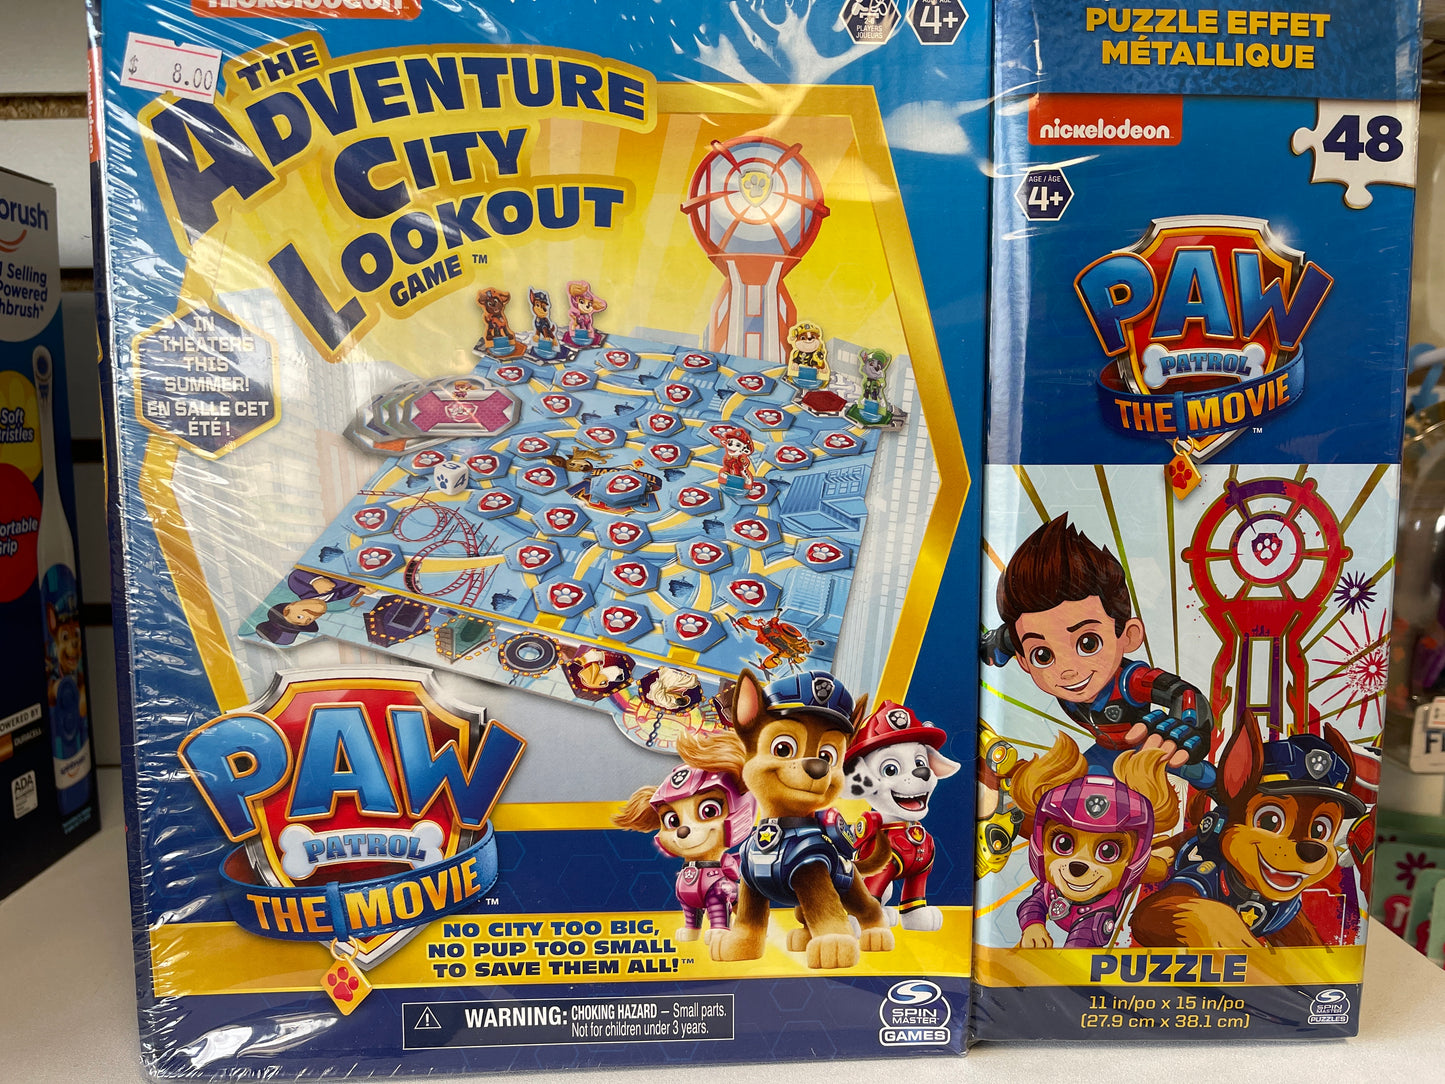 Adventure city lookout game